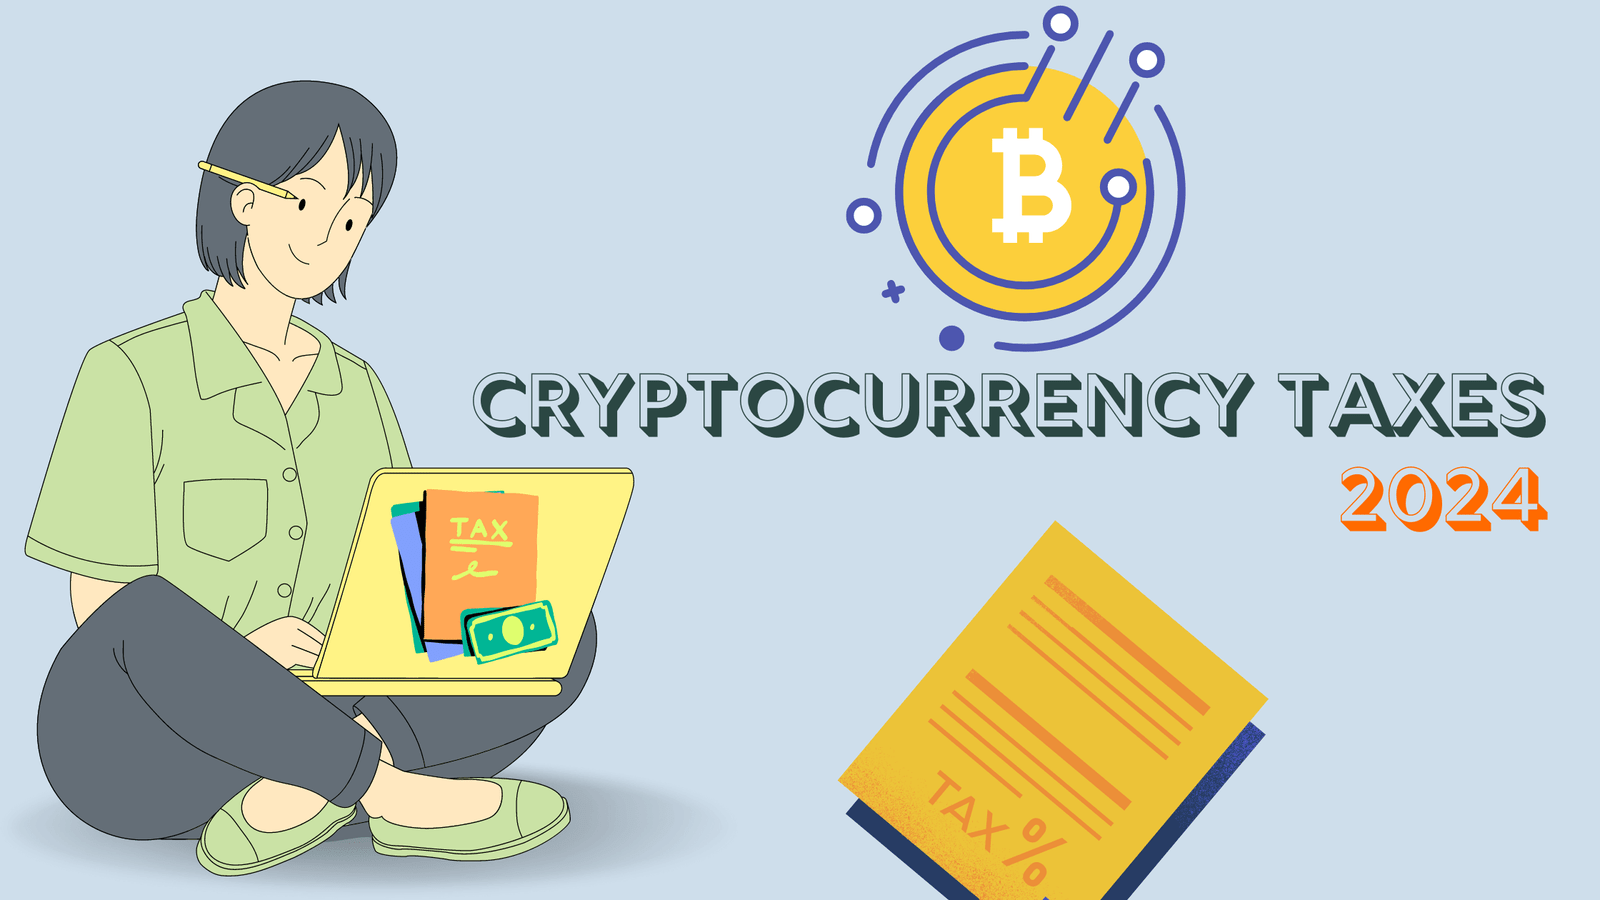 Guide to Understanding Cryptocurrency Taxes in 2024